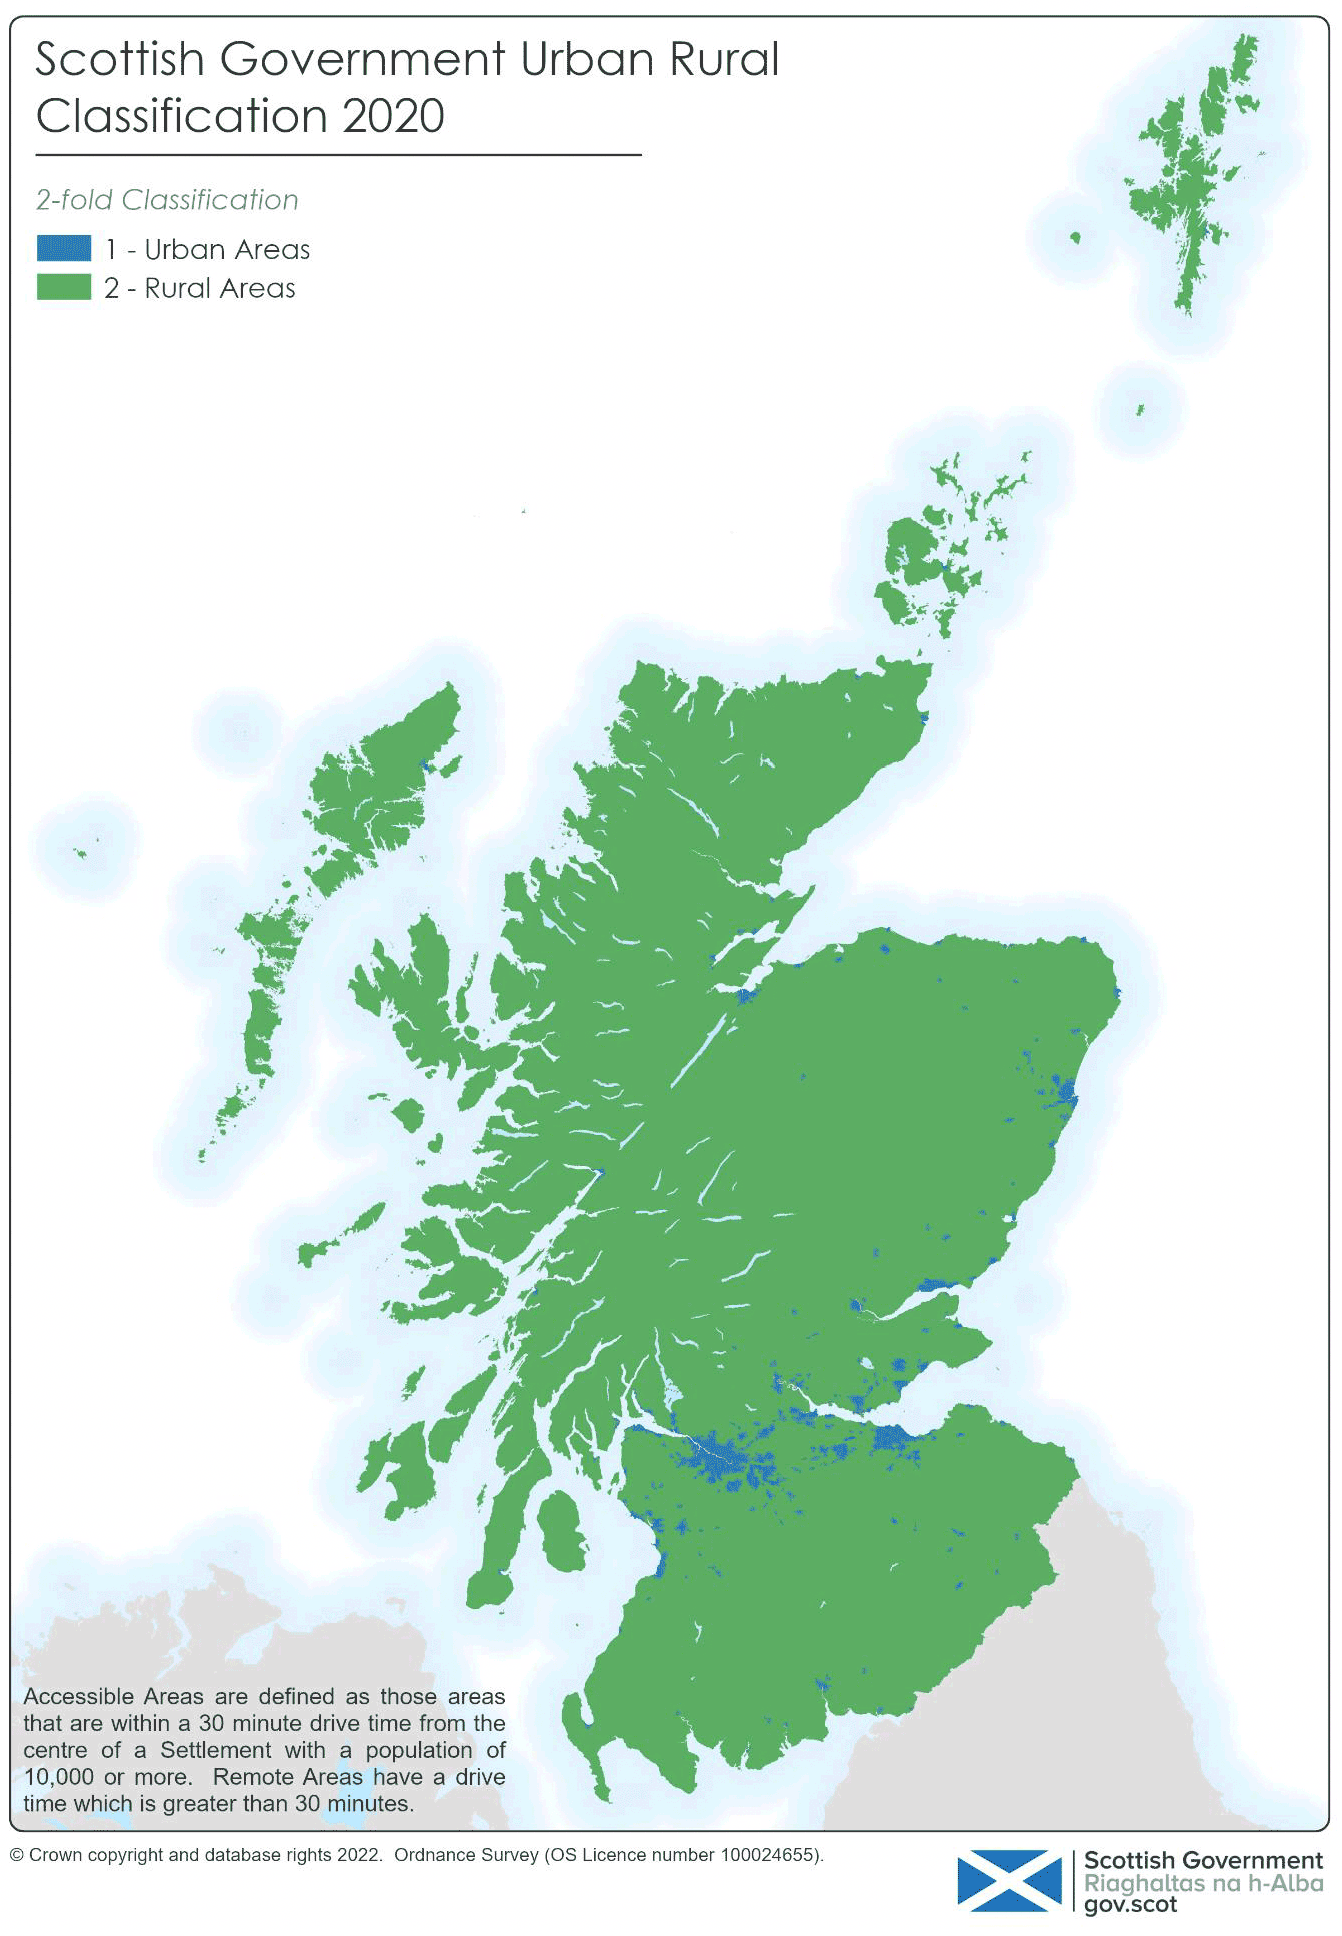 The map shows Scotland at national scale.  Scotland is classified according to a 2-fold classification represented by two colours; Urban Areas are shown as blue and Rural Areas are shown as green.  In the 2-fold Urban Rural Classification, Urban Areas are comprised of the areas defined as Large Urban, Other Urban, Accessible Small Towns, Remote Small Towns, and Very Remote Small Towns in the 8-fold Classification.  Rural Areas are comprised of areas defined as Accessible Rural, Remote Rural, and Very Remote Rural in the 8-fold Classification.  